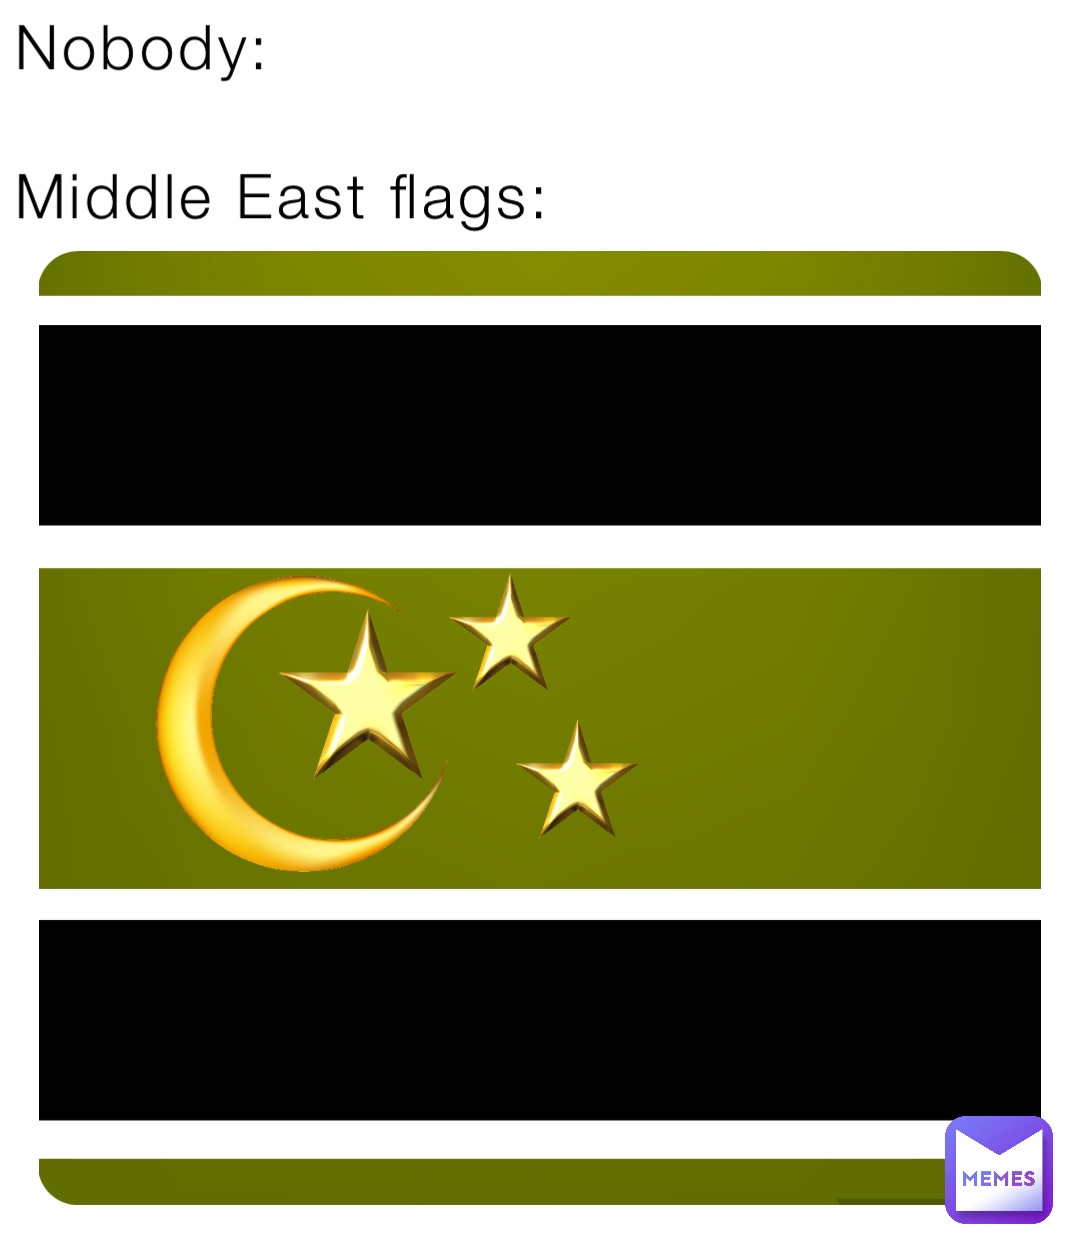 Nobody:

Middle East flags: